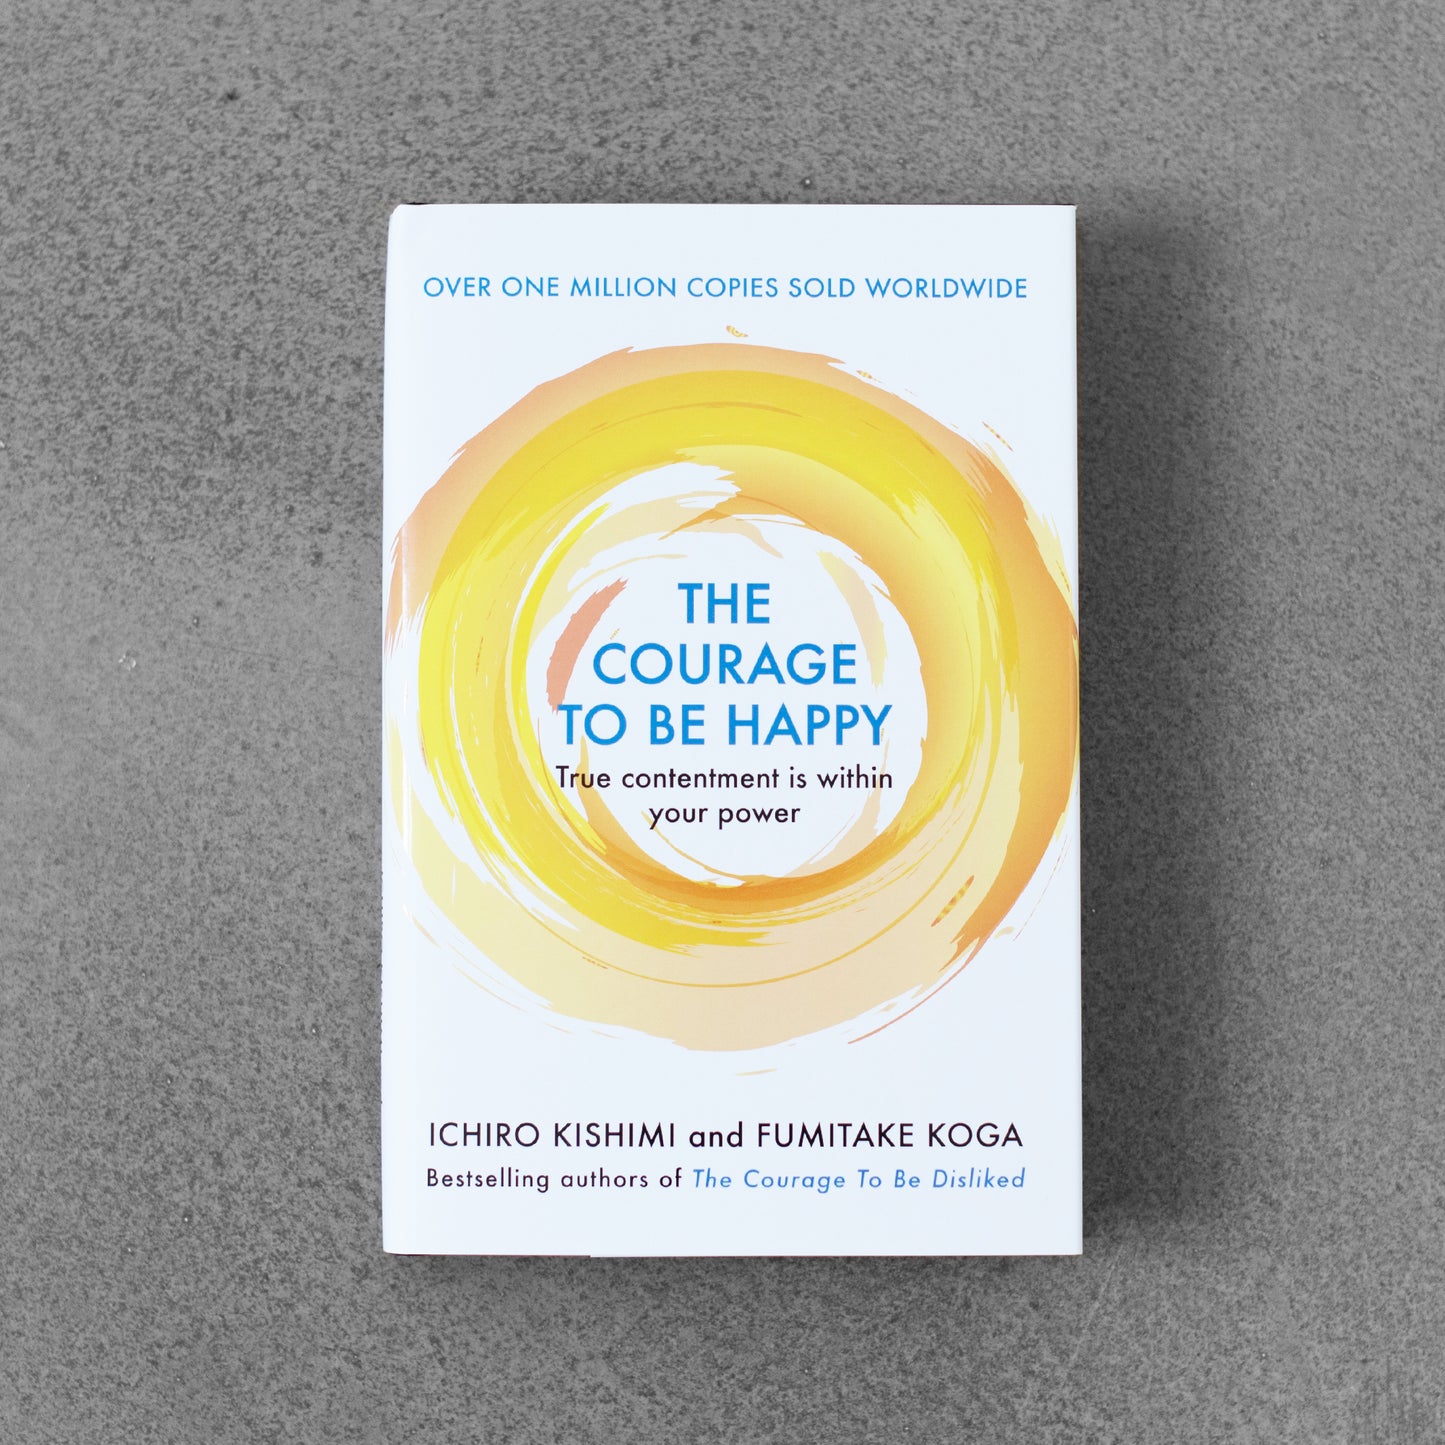 The Courage to Be Happy: True Contentment Is within Your Power - Ichiro Kishimi and Fumitake Koga